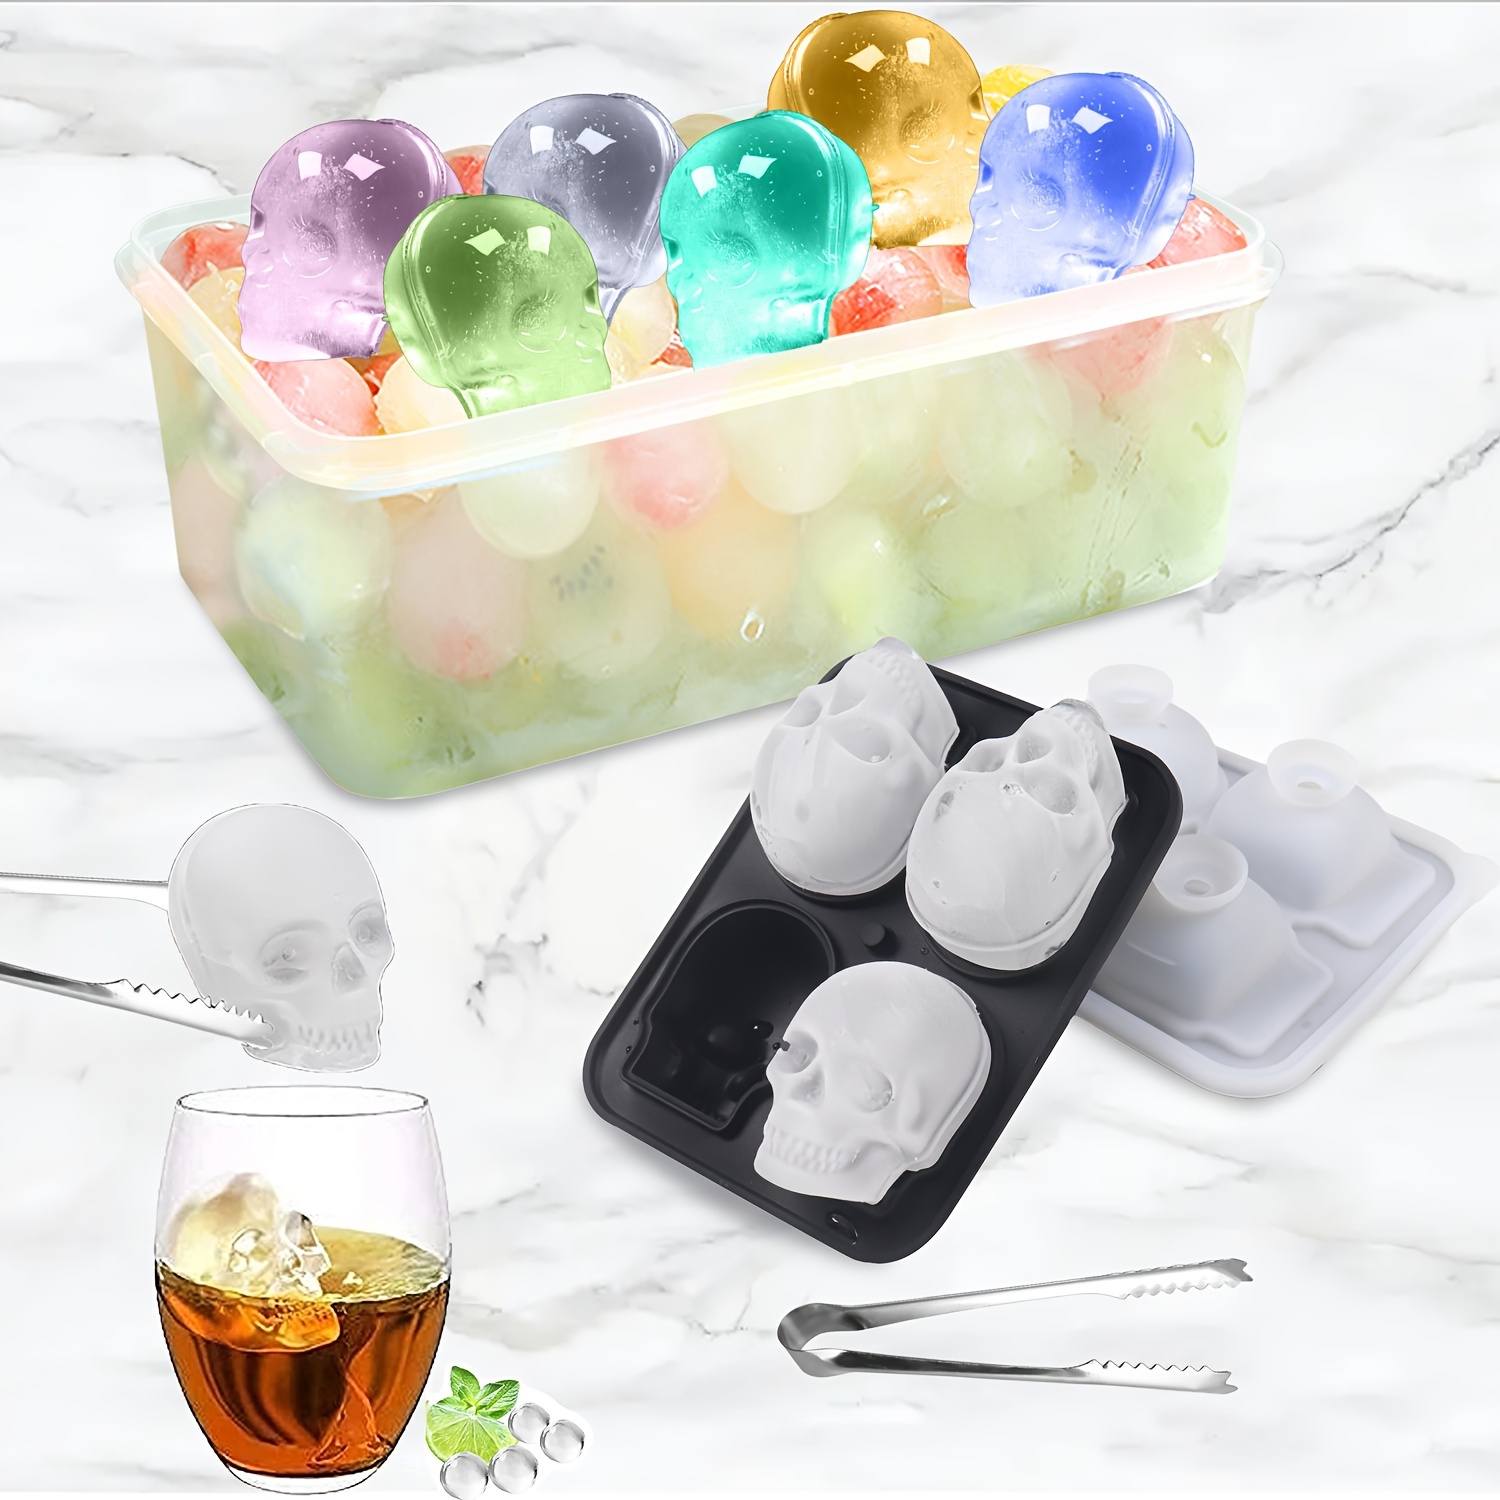 Ice Cube Mold With Ice Storage Box And Tong, Silicone Skull Ice Cube Tray,  Chocolate Mold, Halloween Mold For Pudding,jelly,candy, Whiskey Ice Cube  Tray, Ice Trays For Freezer Cocktail Whiskey, Kitchen Accessaries